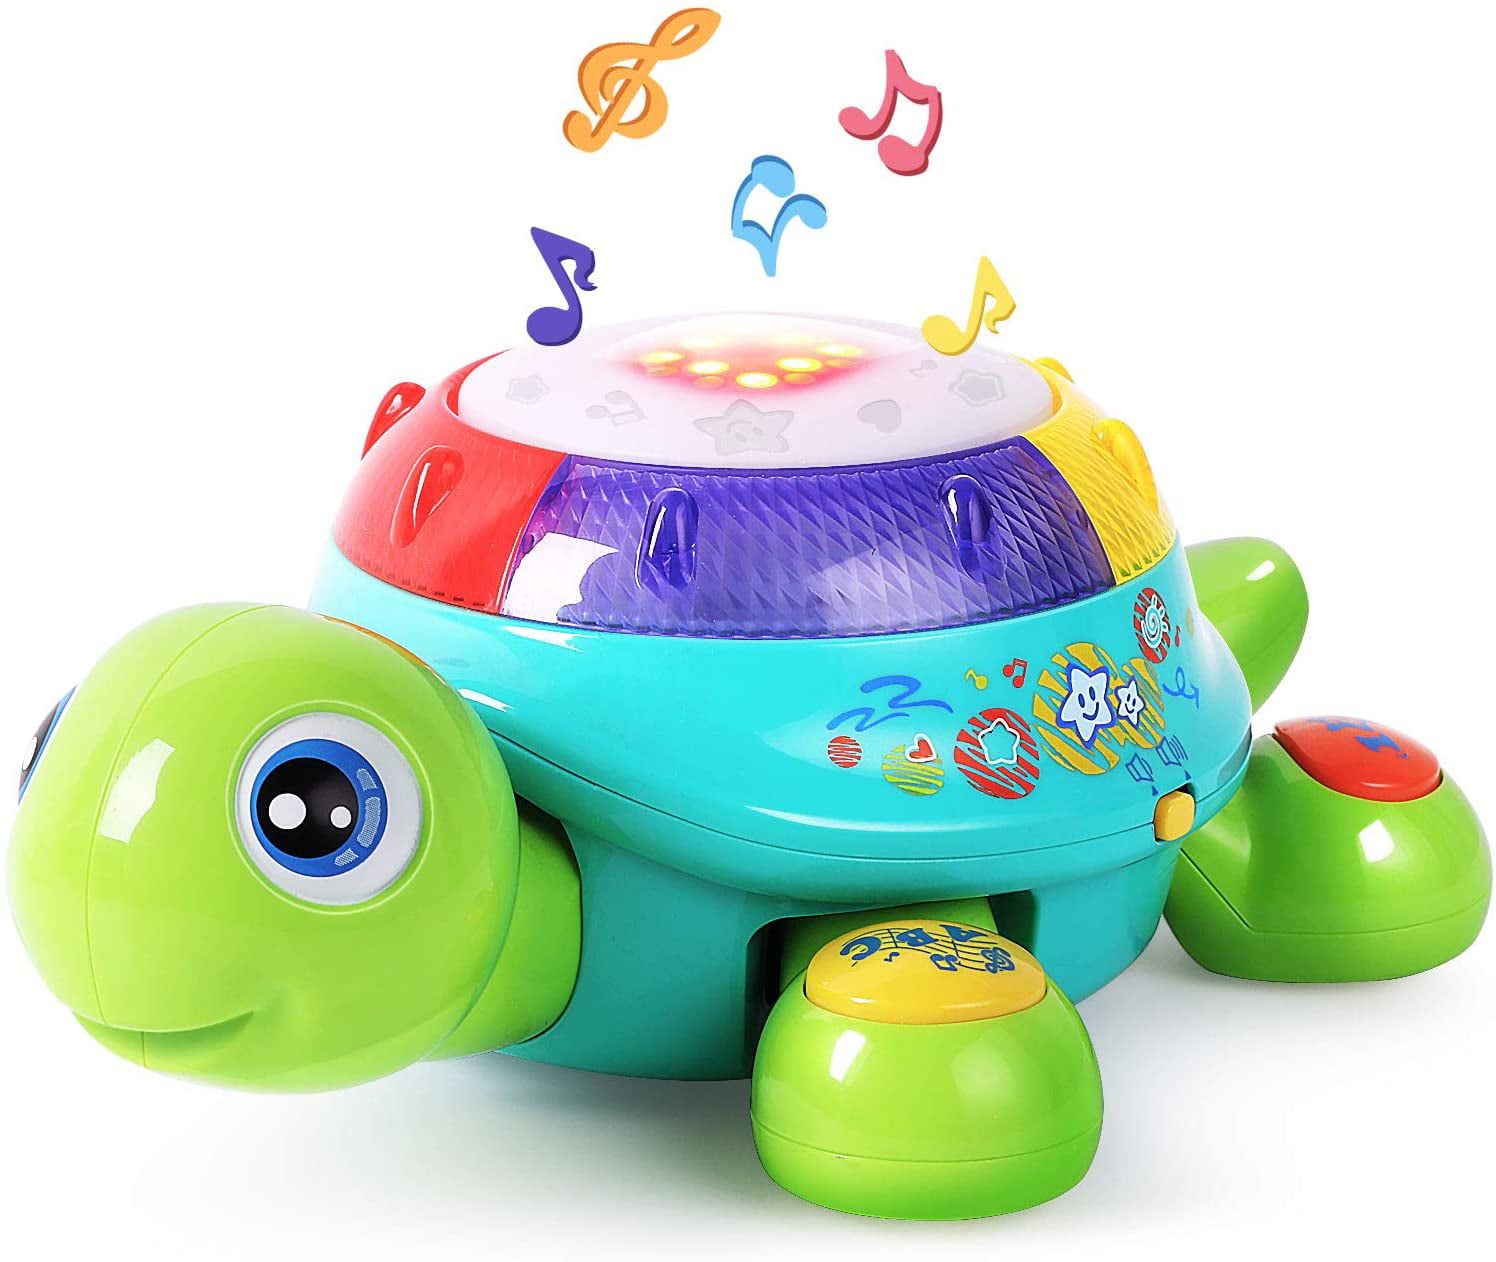 Ltd. Coolecool Cute Duck Baby Musical Toys 18 Months Light Up Educational Electronic Activity Sound Music Toys for Toddlers Infant Preschools Kids Yellow Guangdong Huile Toys Industrial Co 